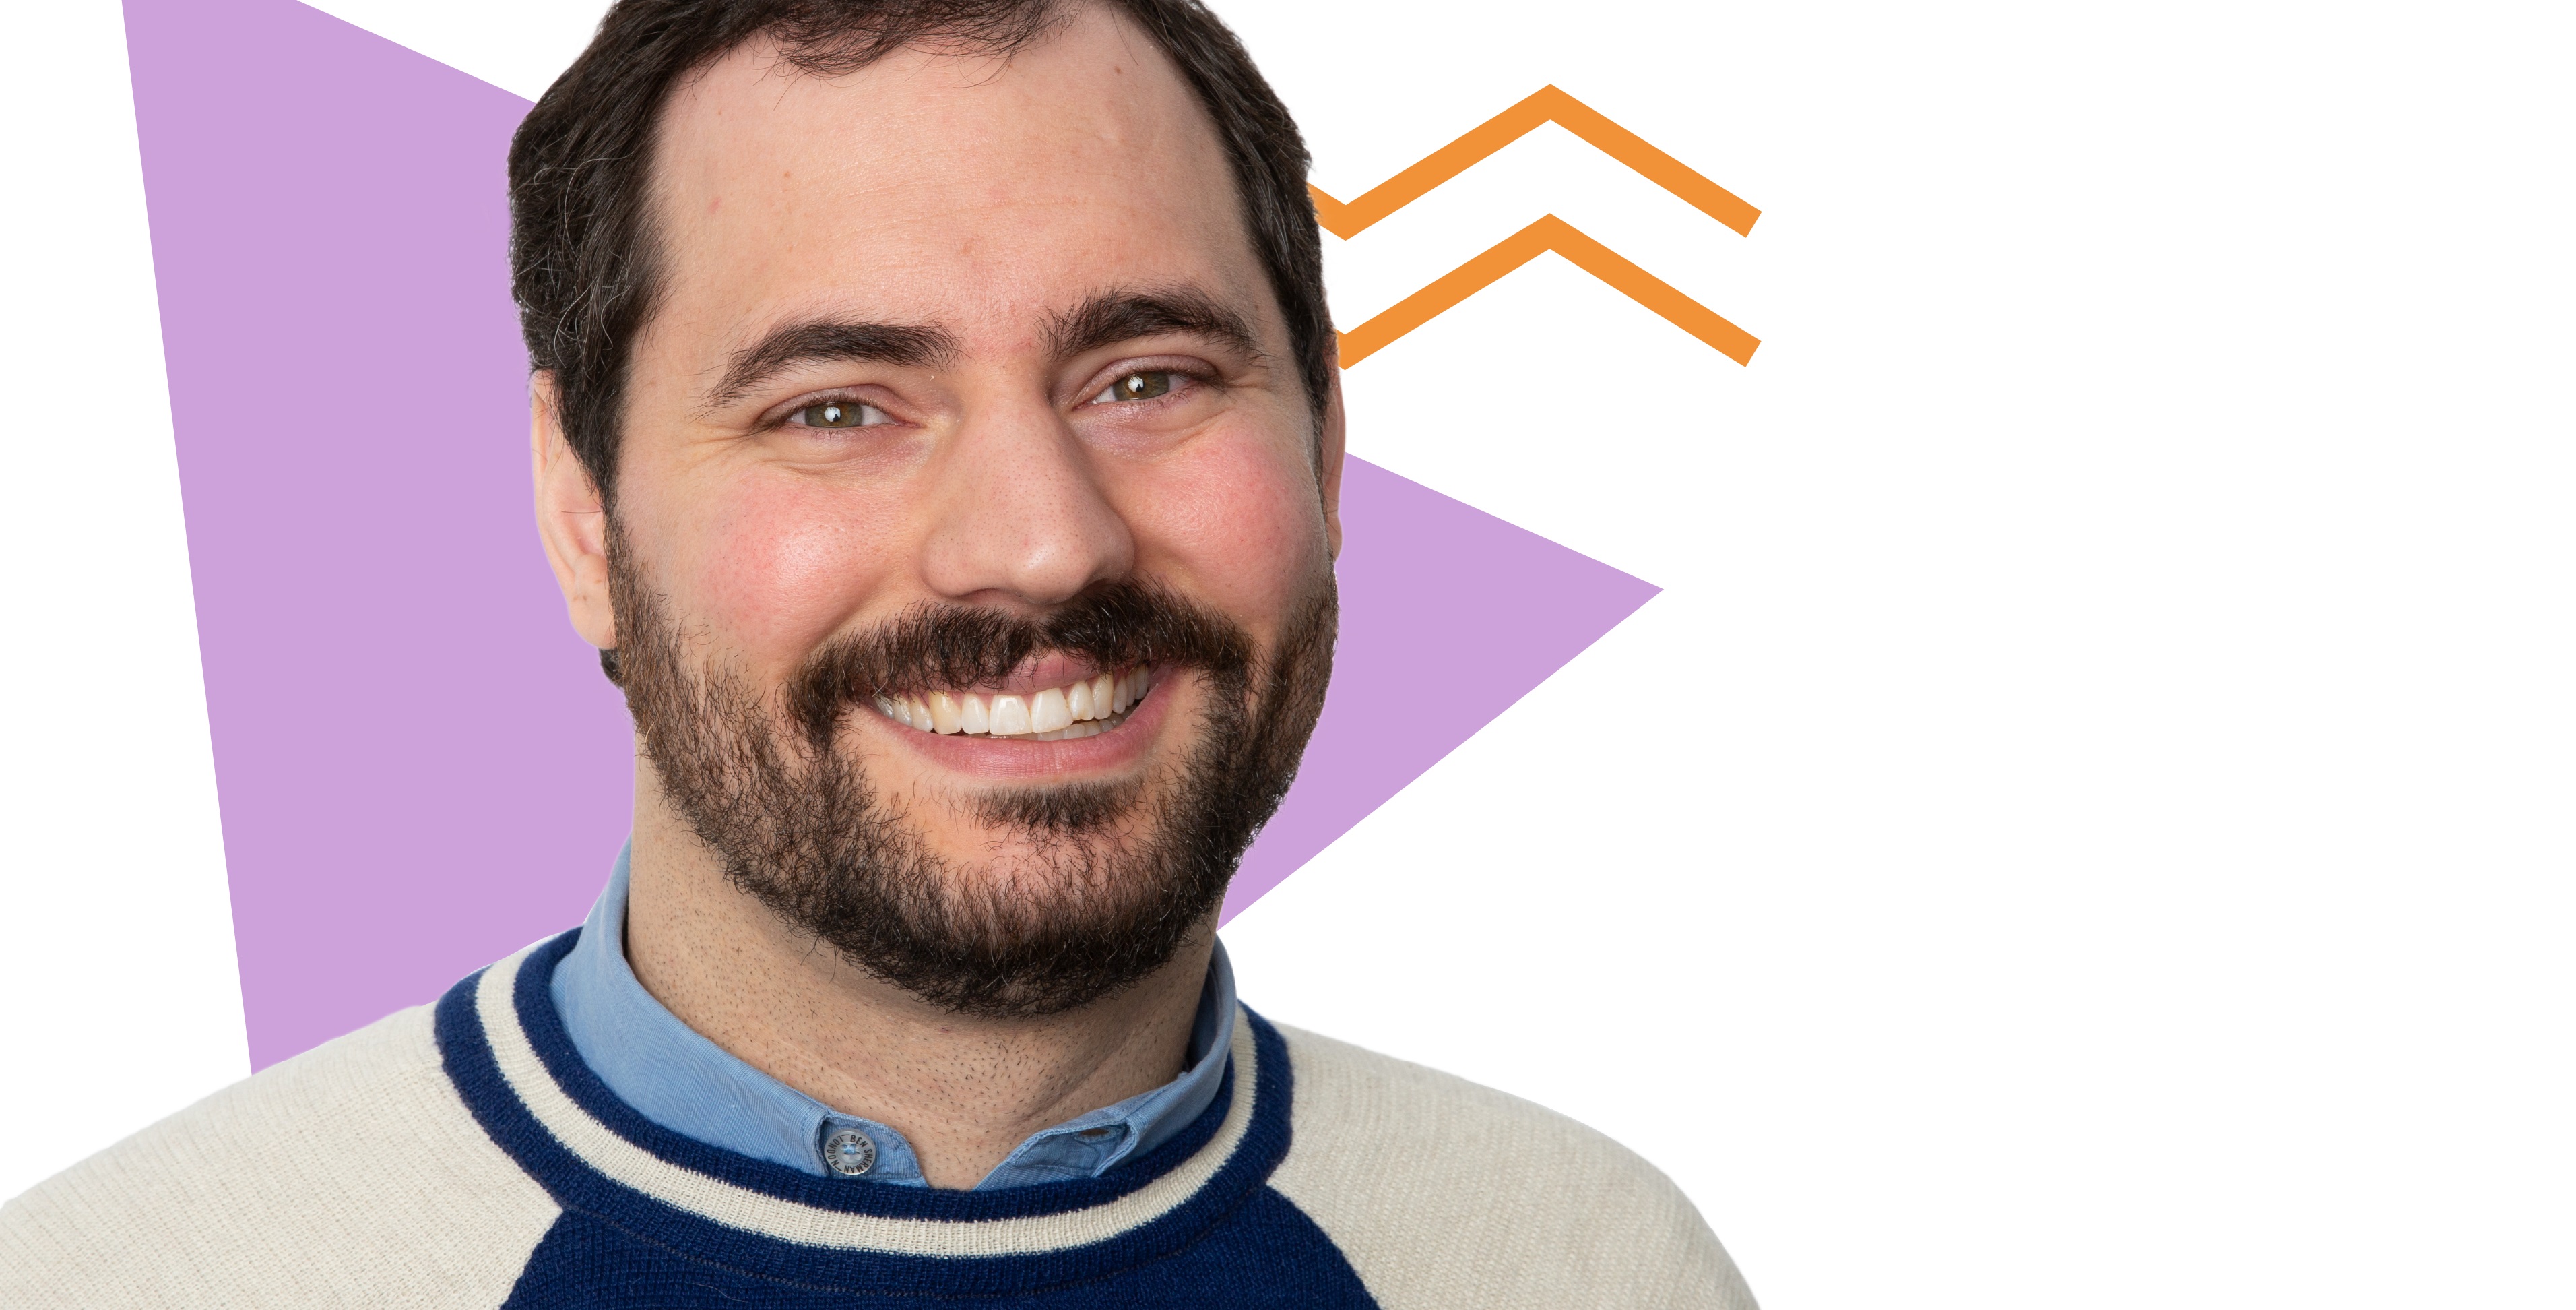 White male with a dark brown beard in his 20's smiling in front of a purple, orange and white illustrated abstract background.